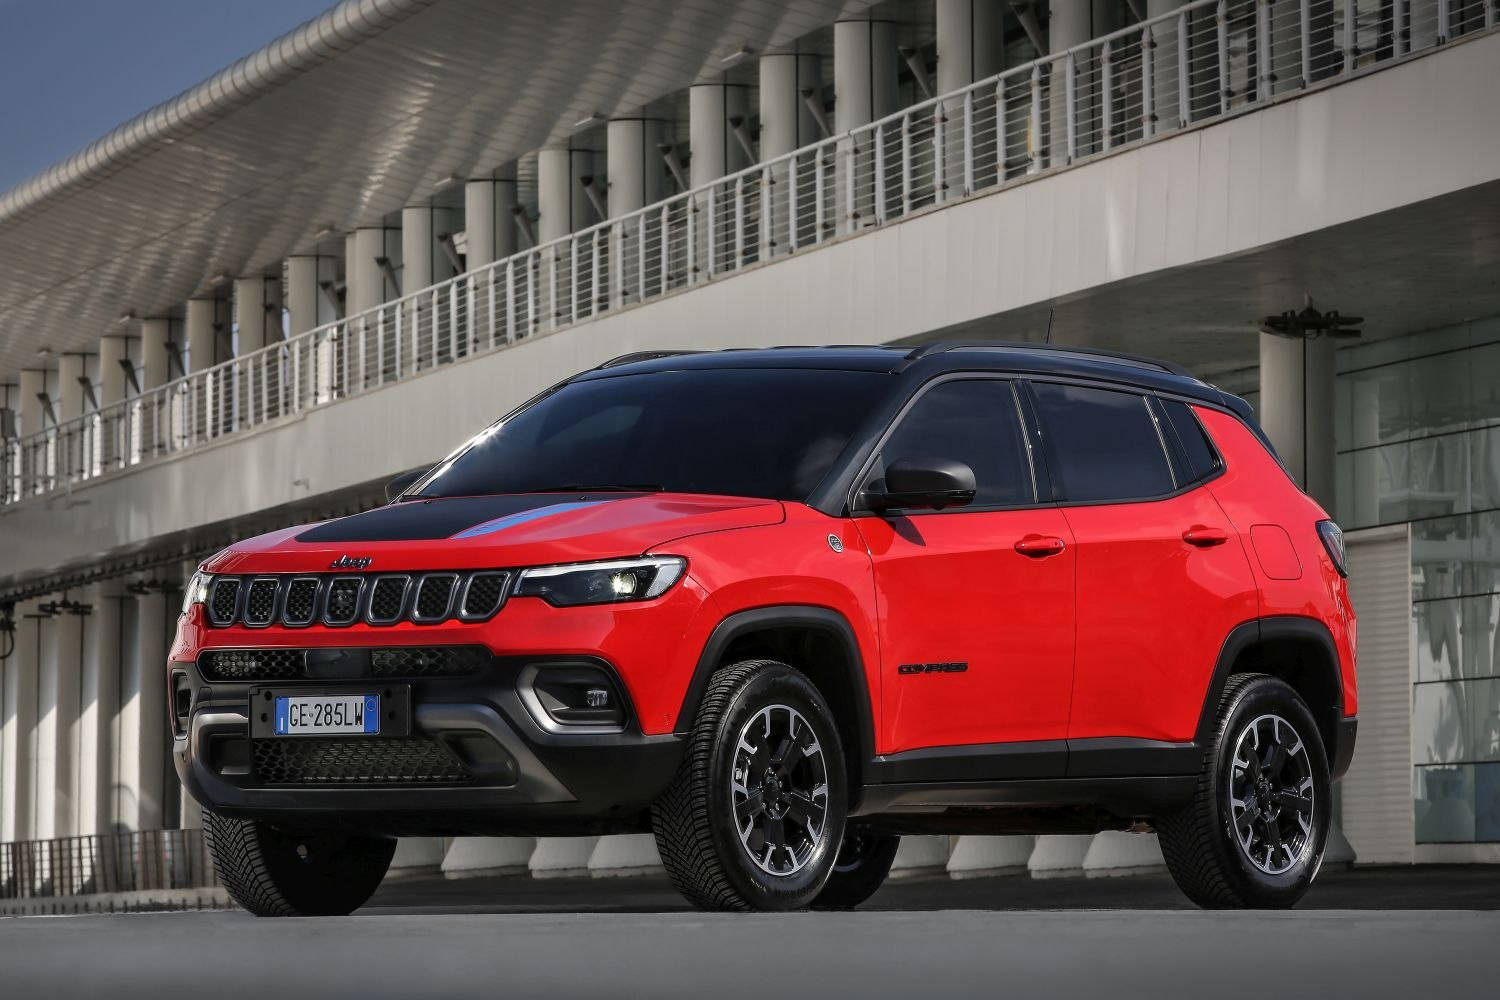 Jeep Compass Black And Red Gray Building Wallpaper